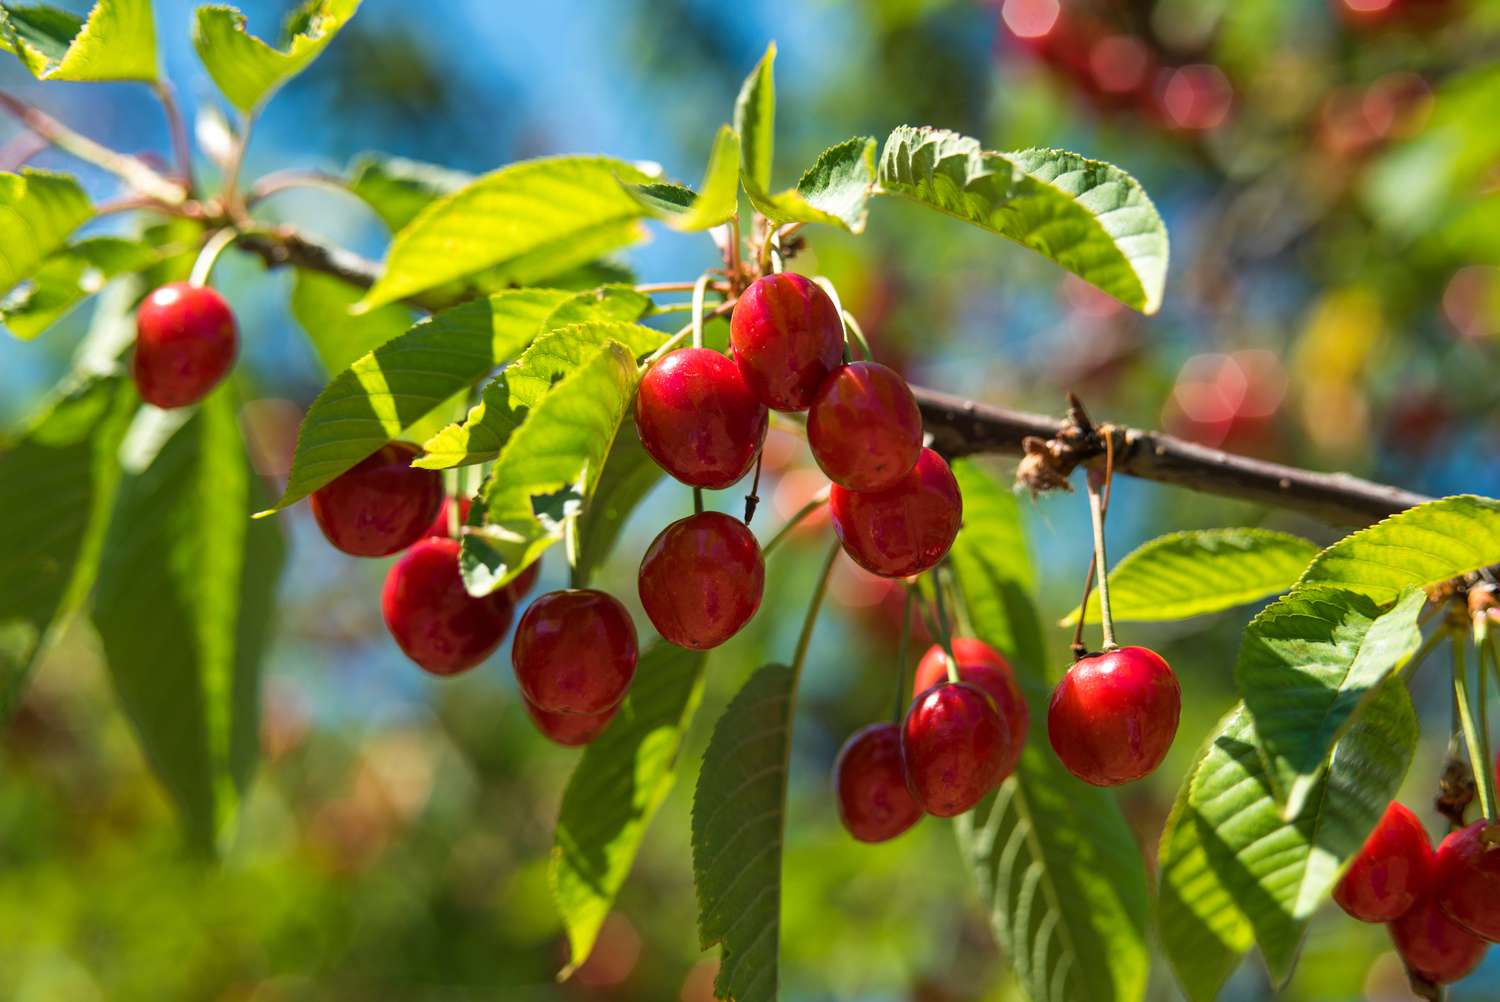 How To Plant A Cherry Tree From Seed